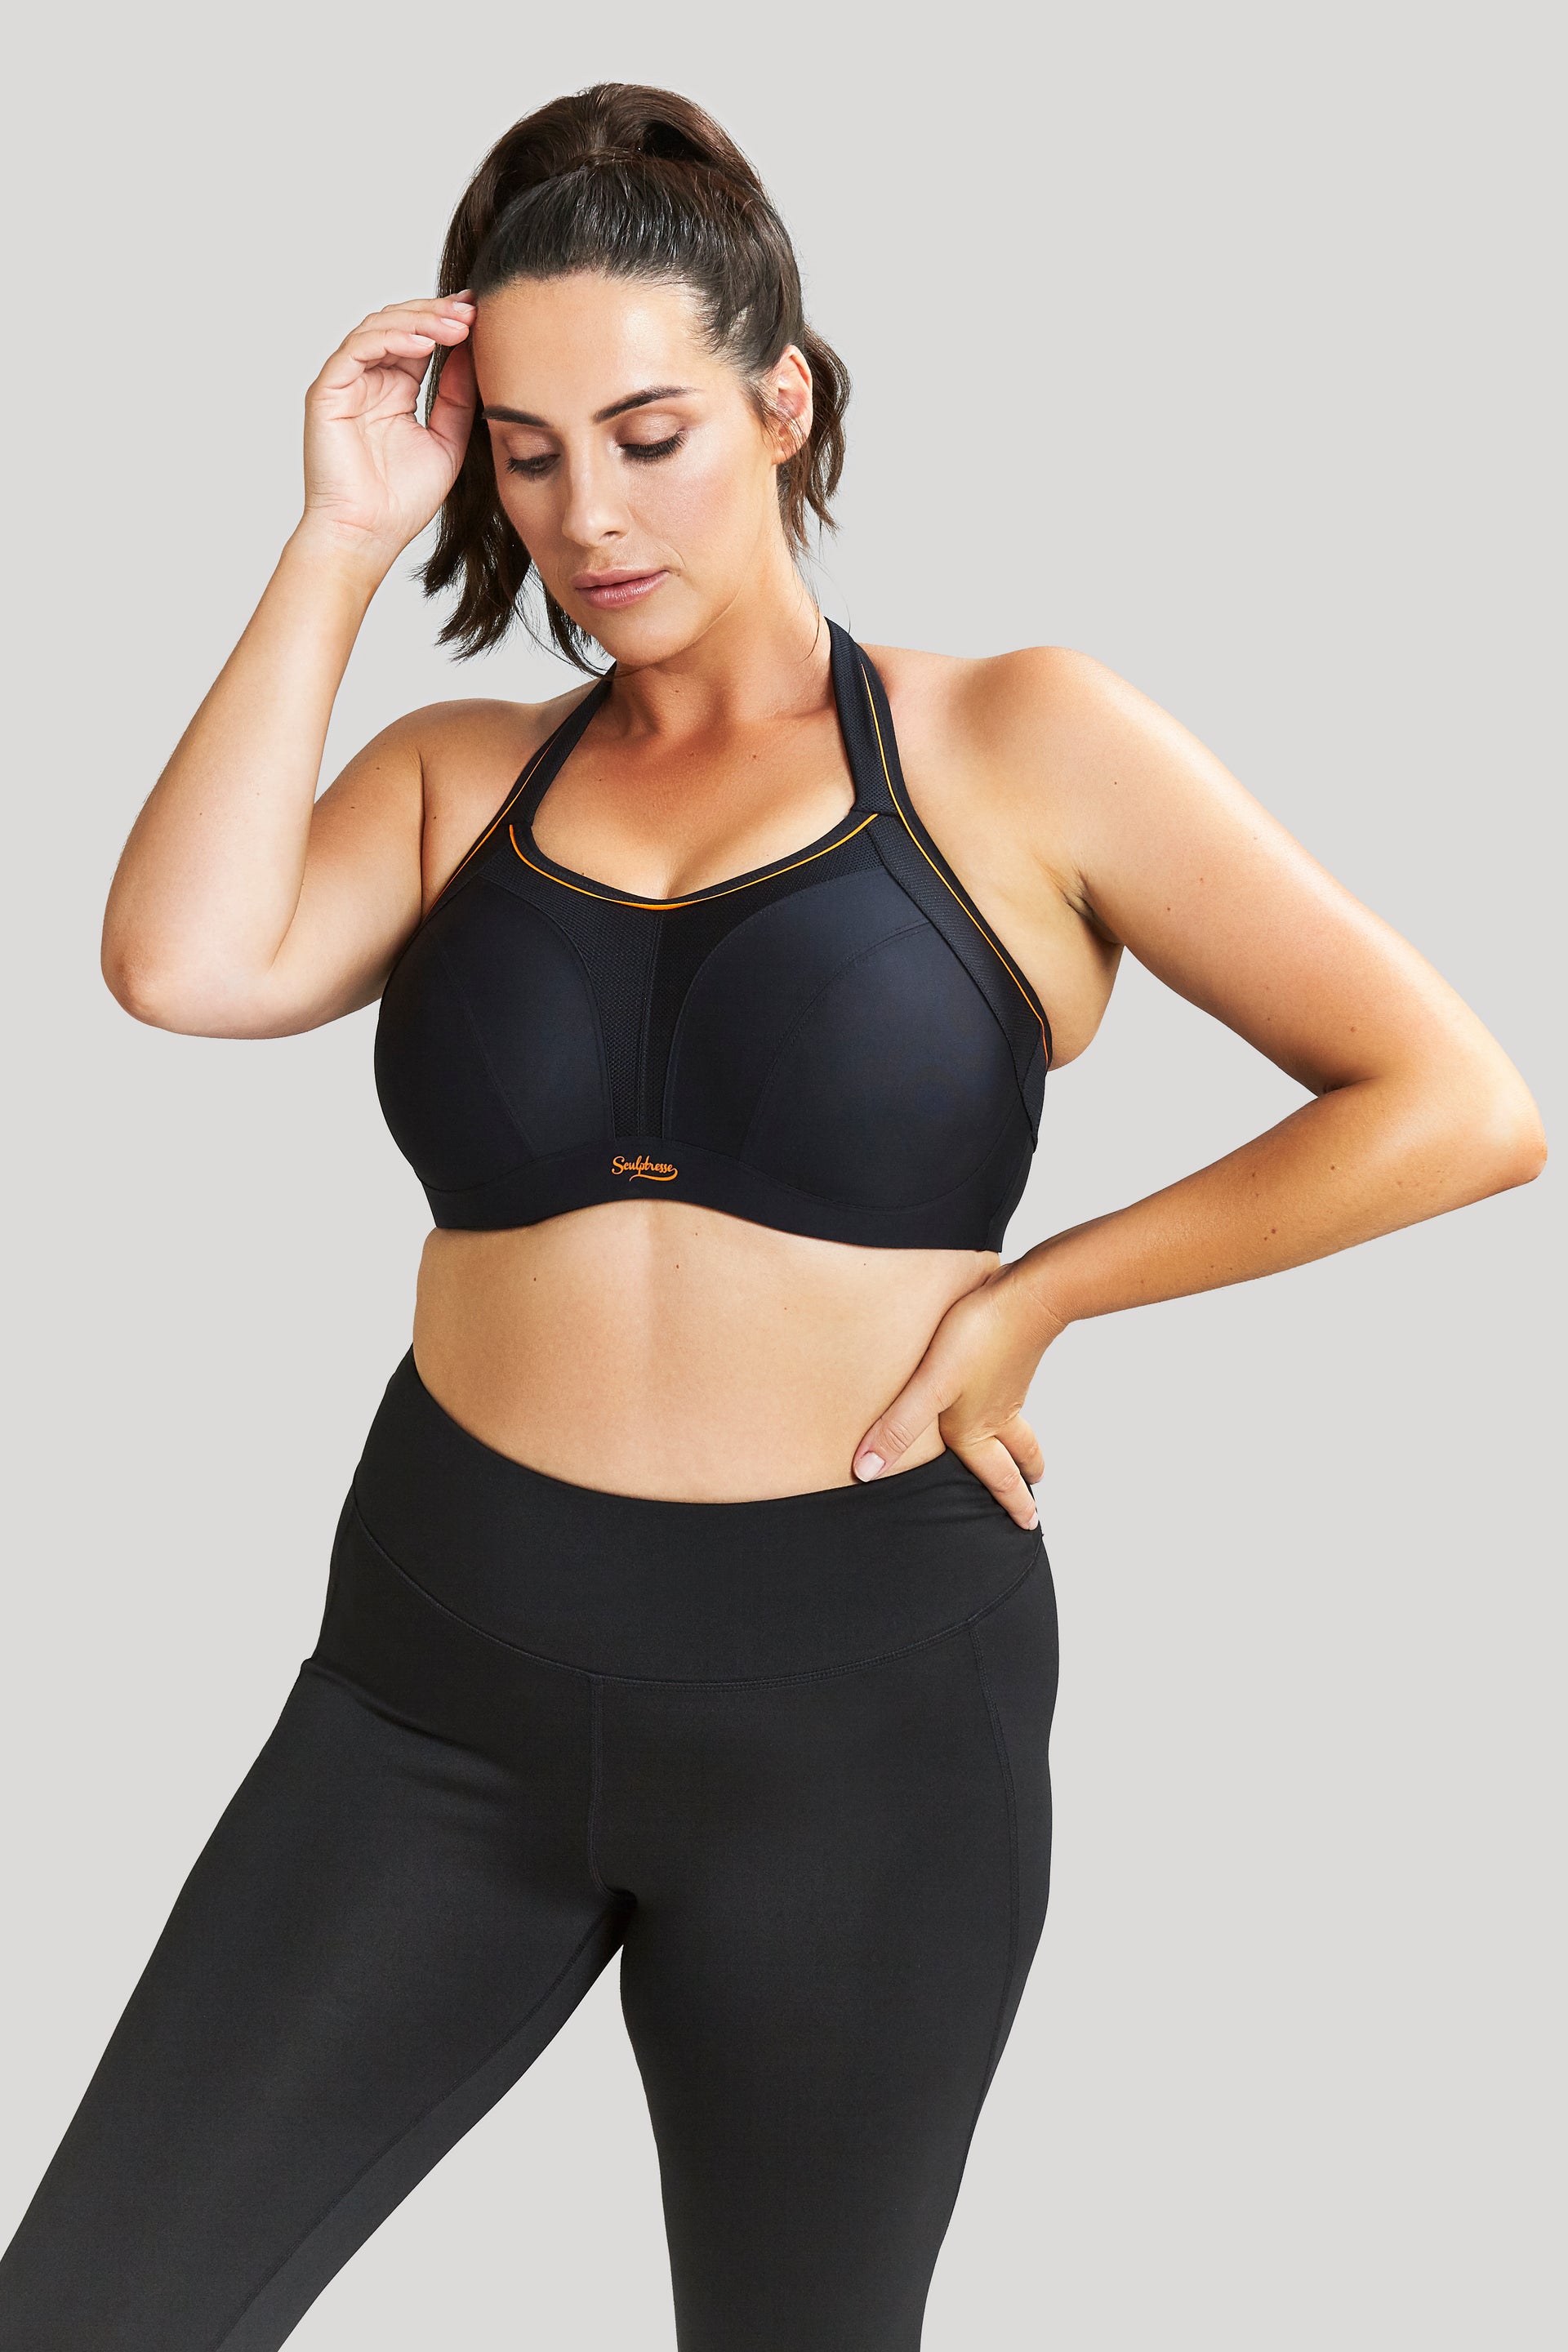 H cup, HH cup, J cup, K cup sports bra